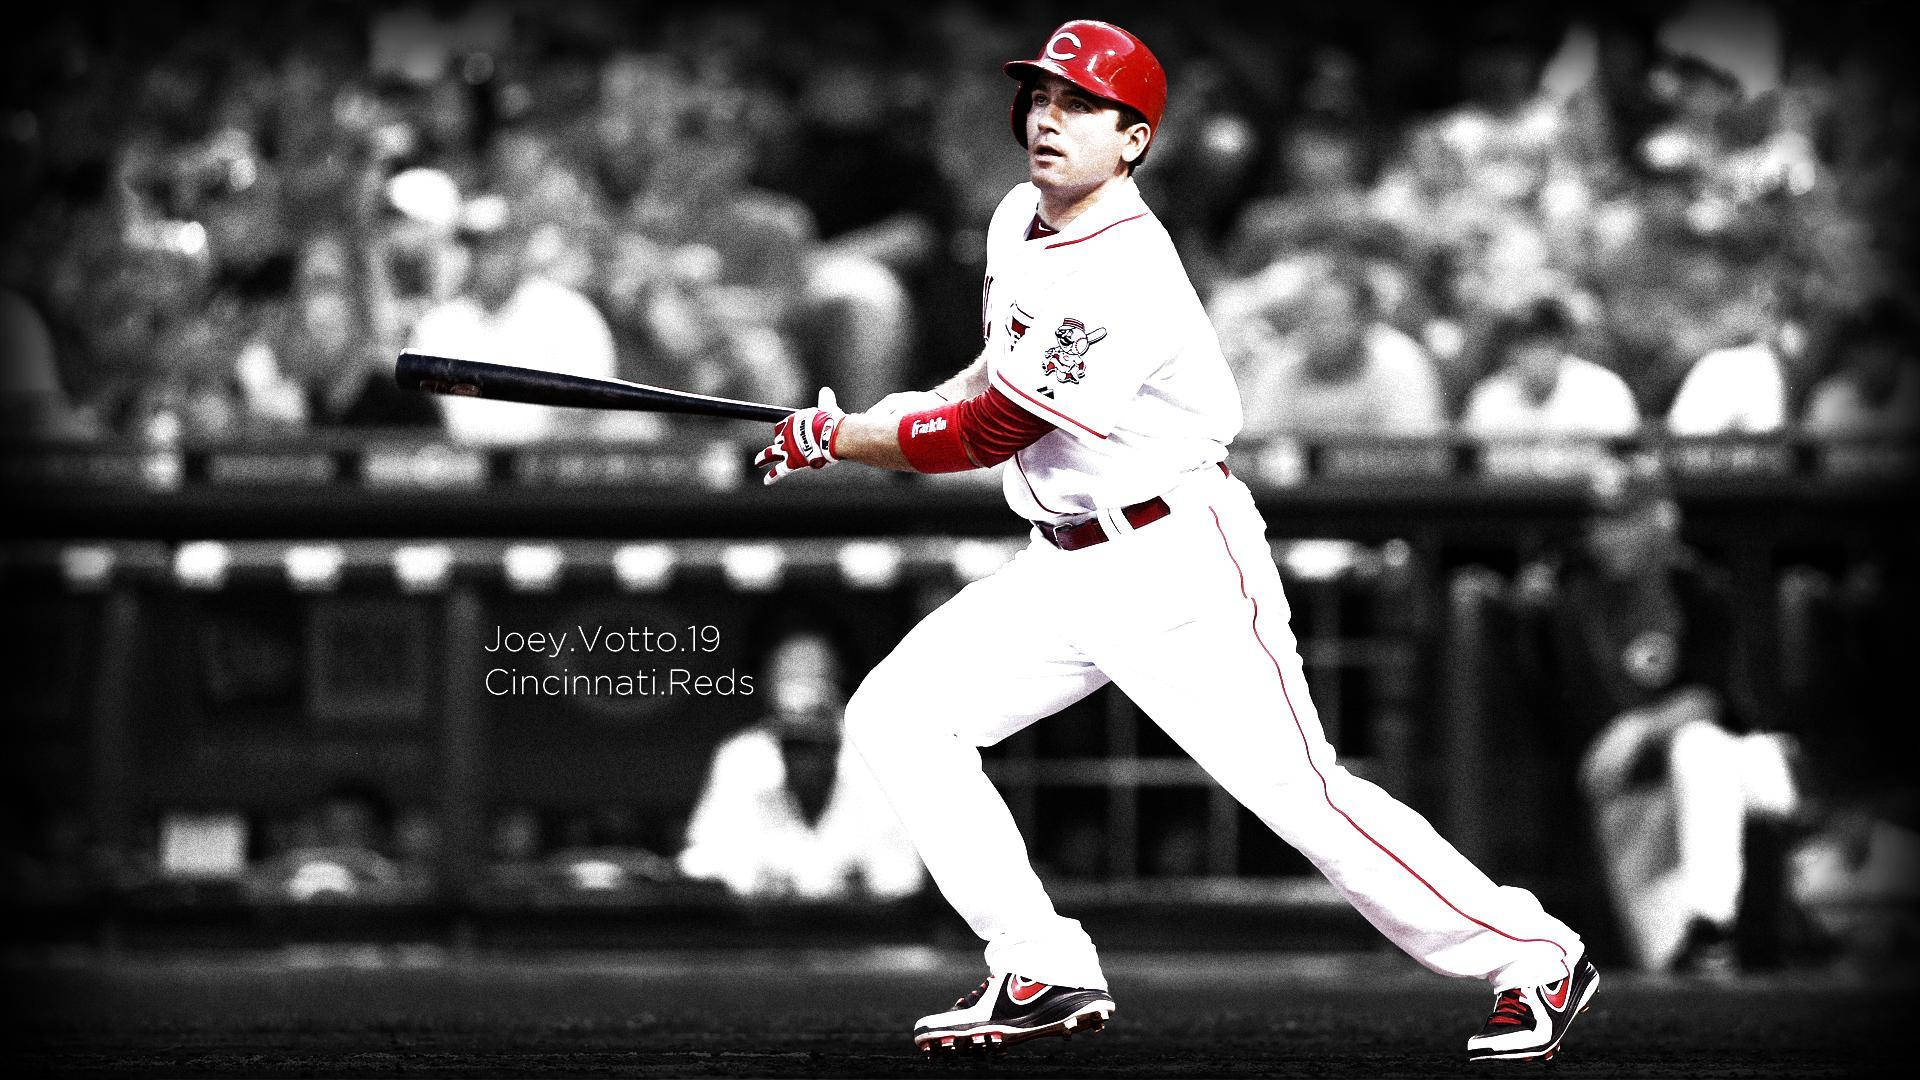 Joey Votto Running With A Bat Wallpaper